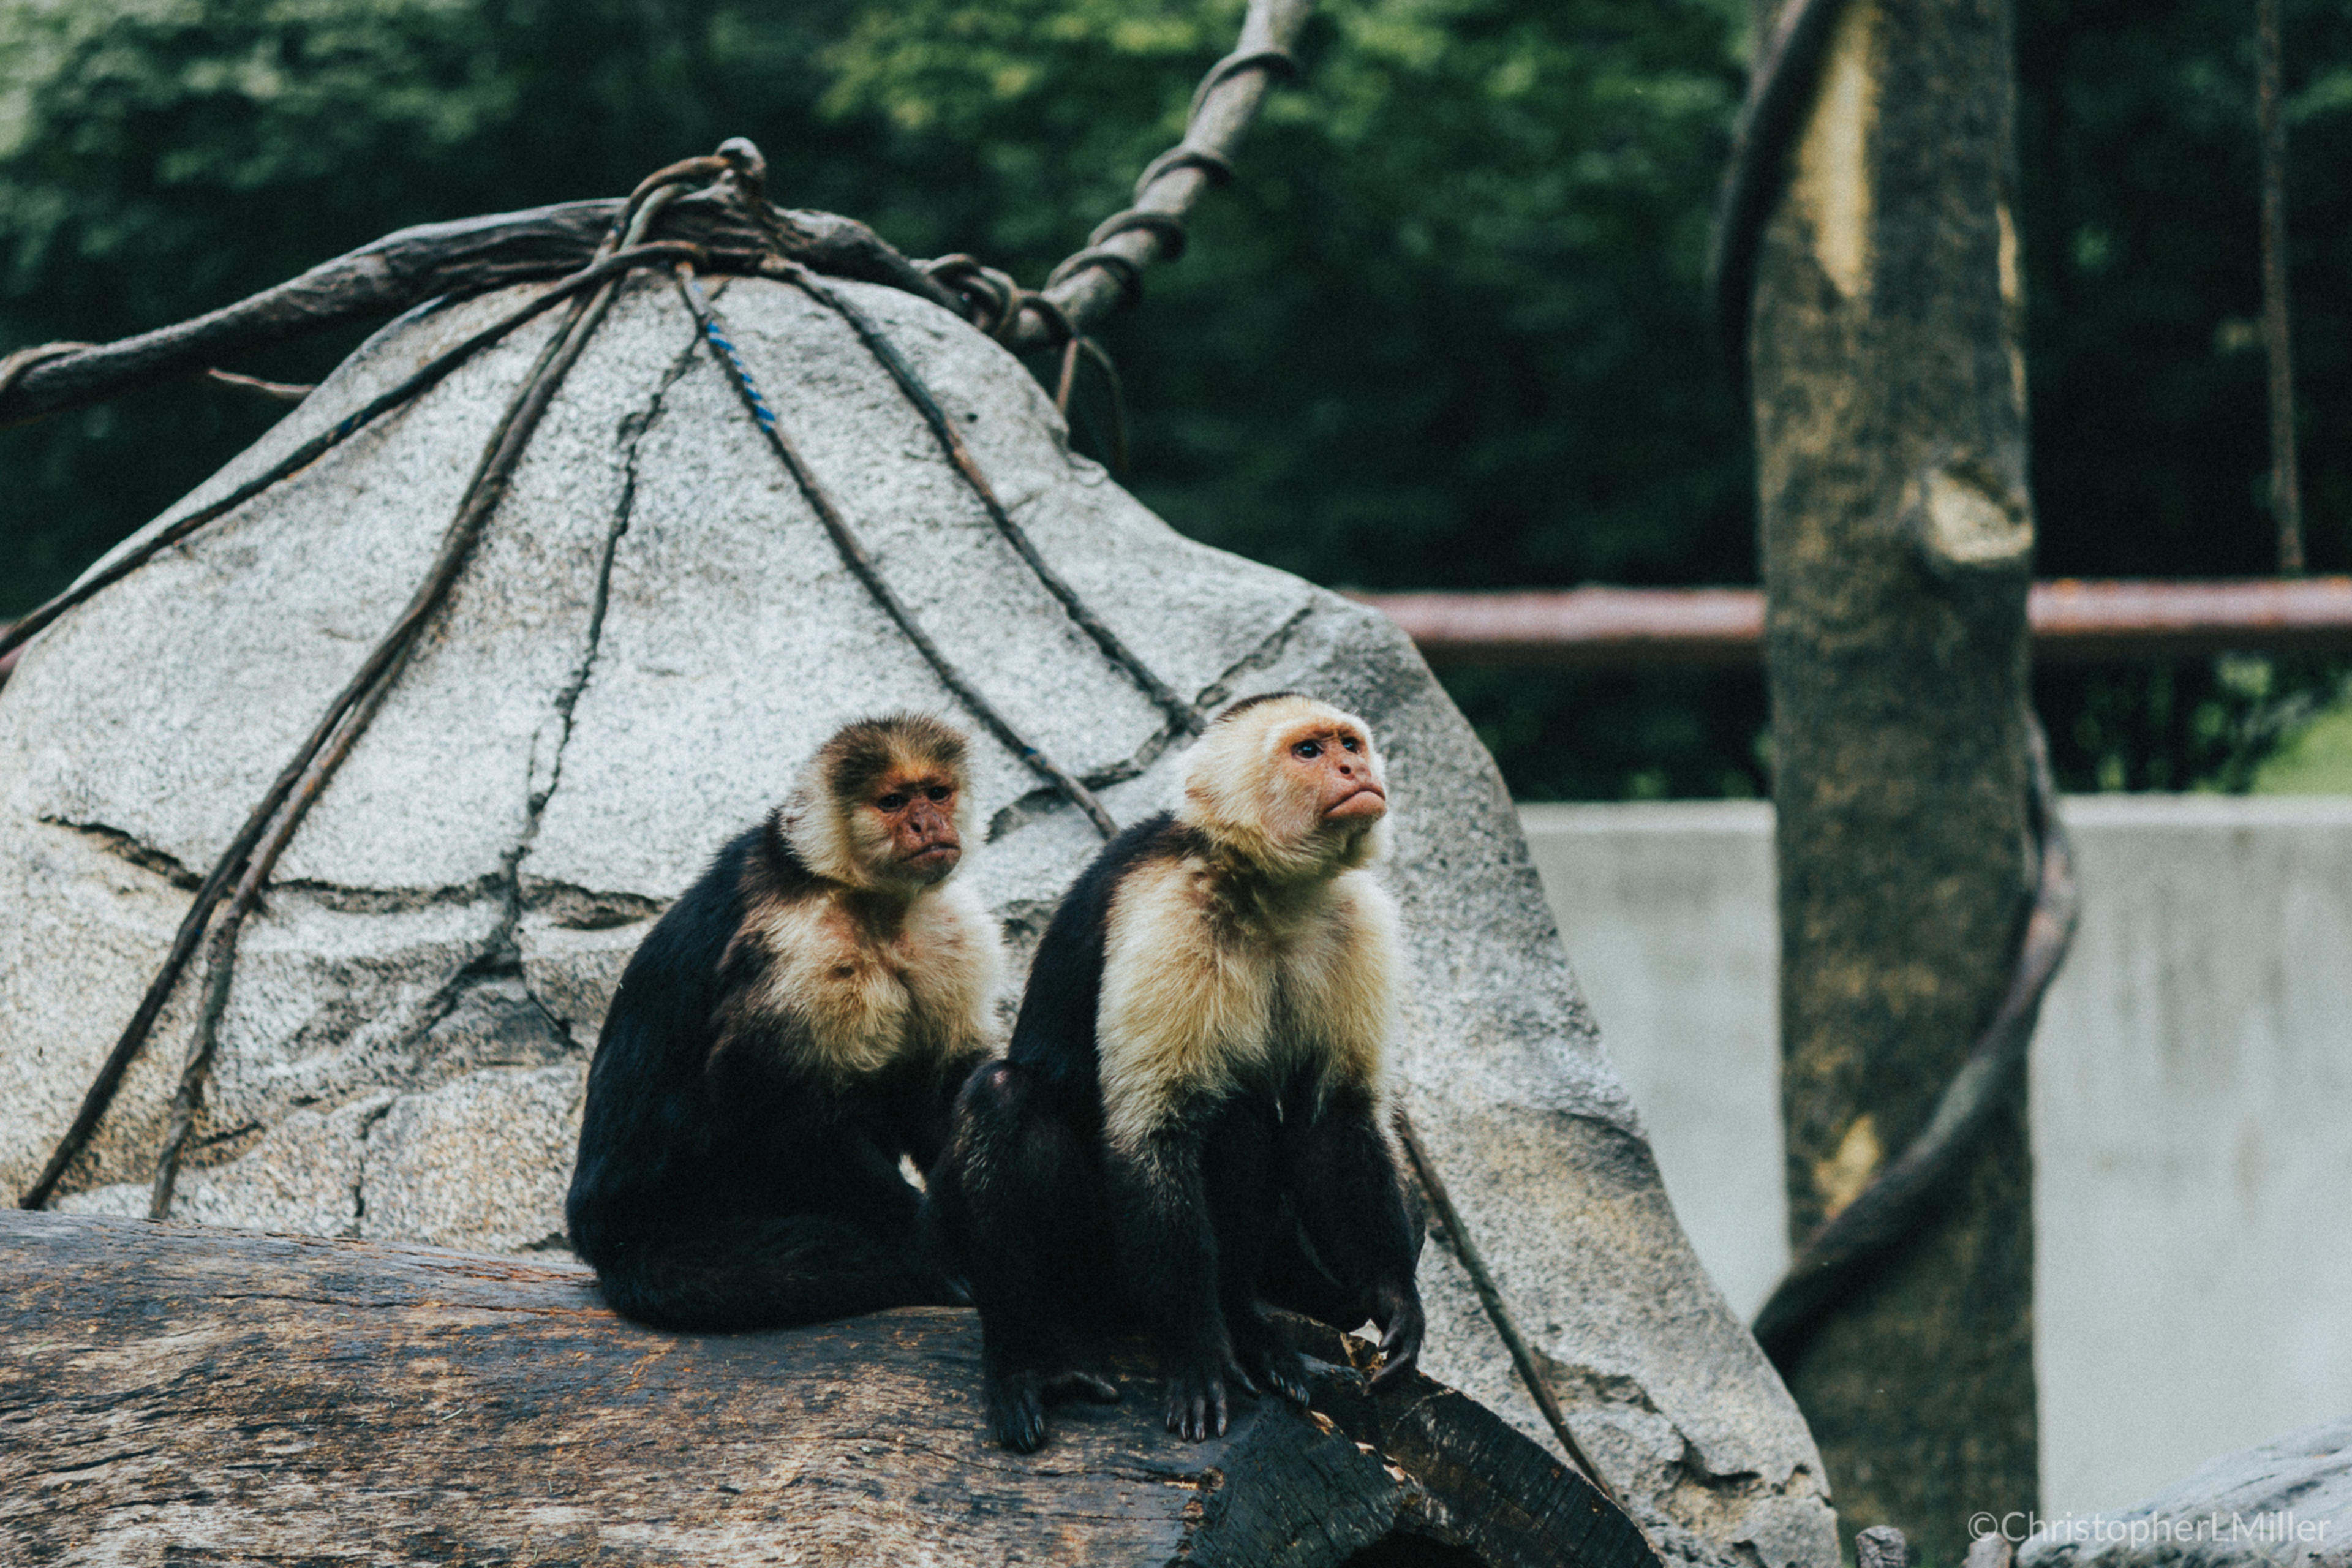 Monkeys staring off into the distance